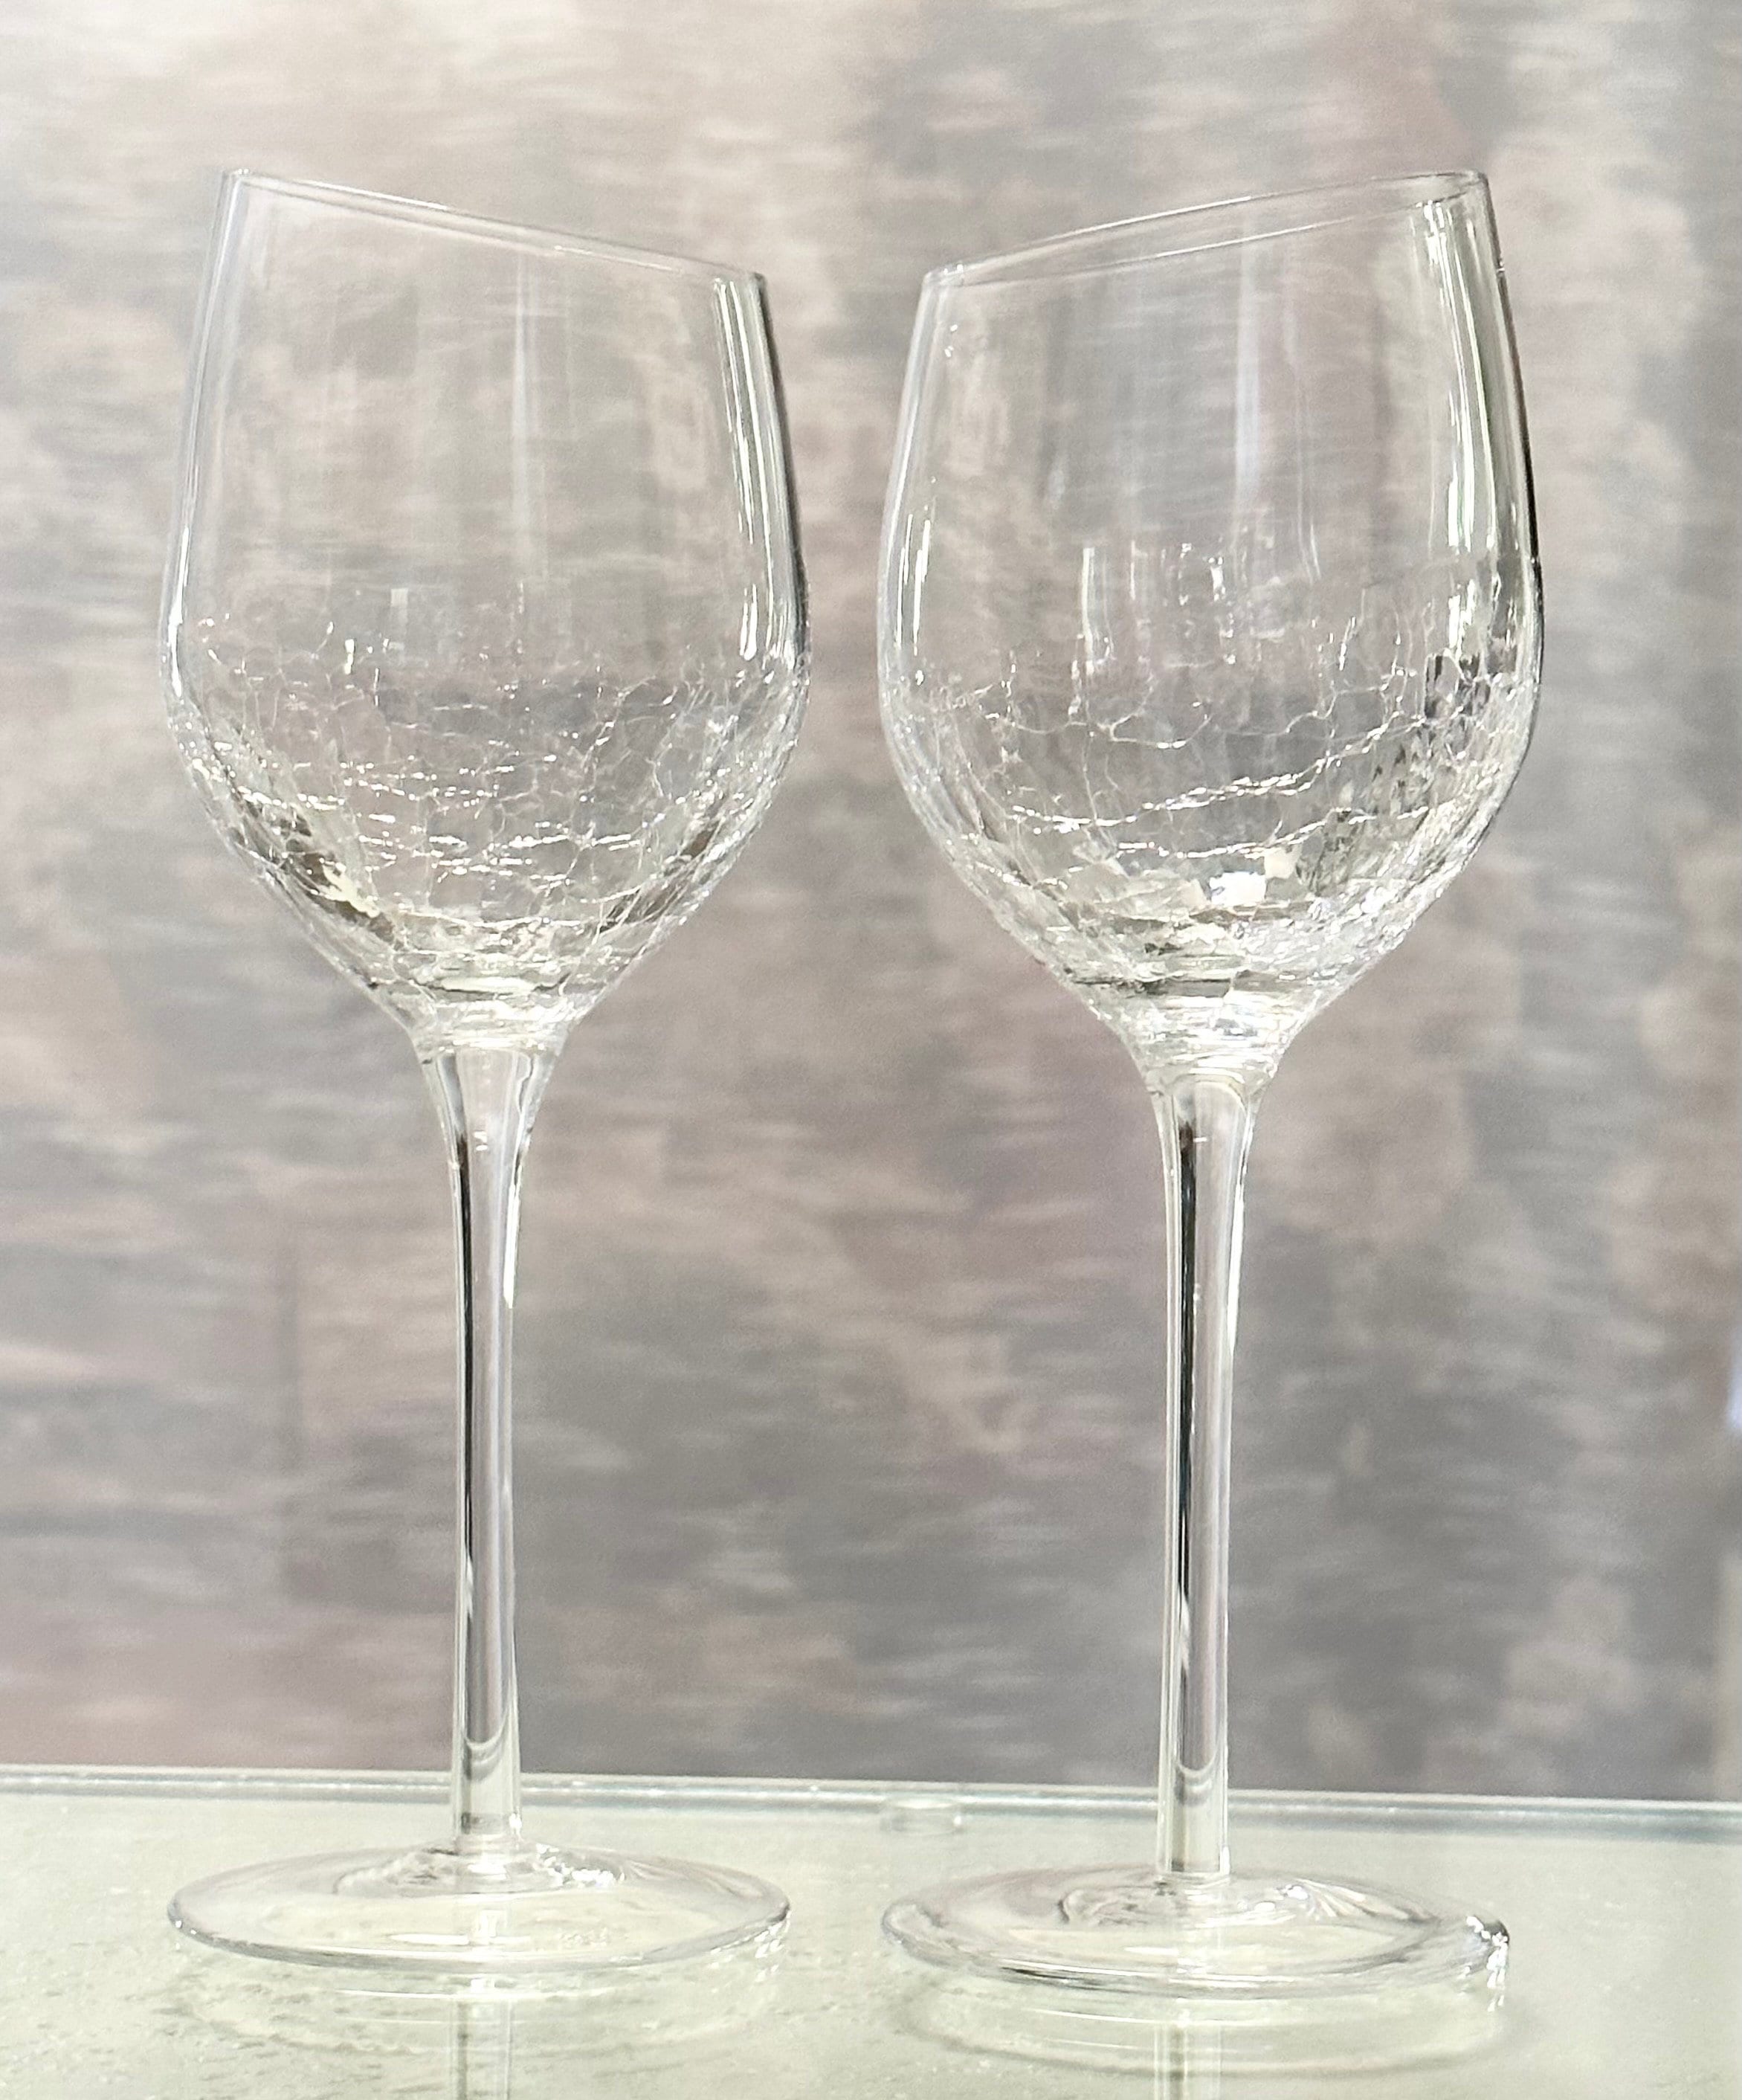 Crackle Clear White Wine Glass, Pier 1 Imports